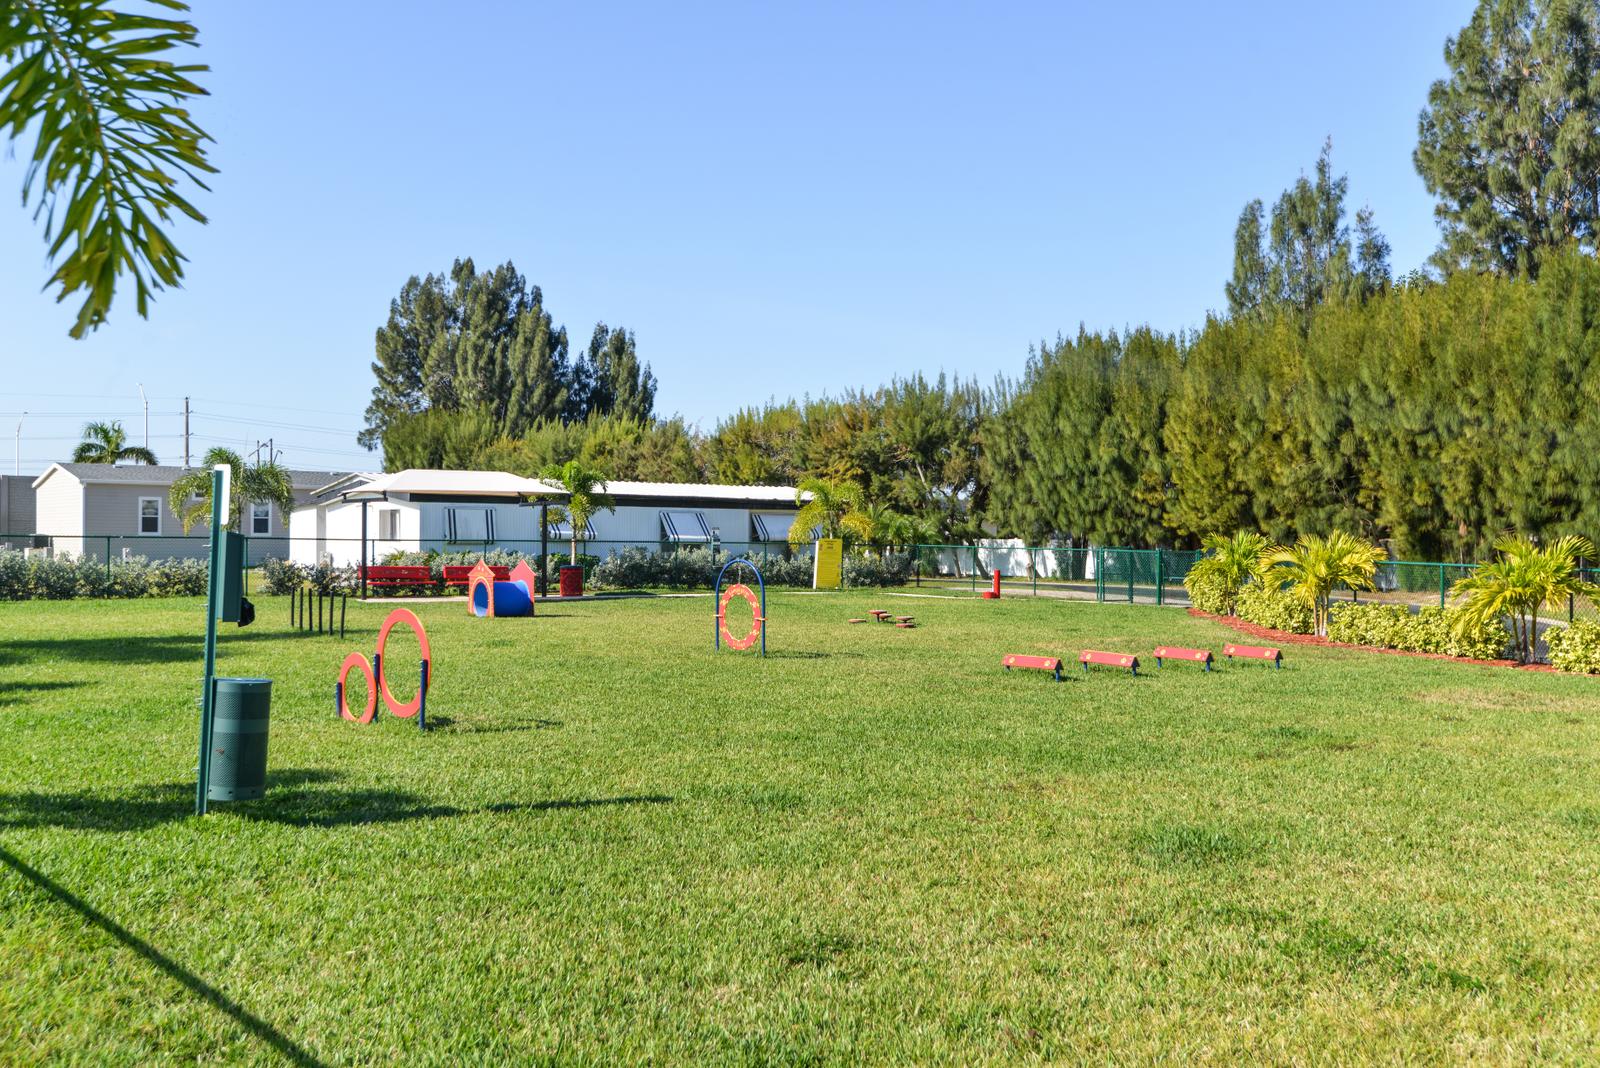 The pet park is enclosed for the pets to roam free and enjoy the agility course.